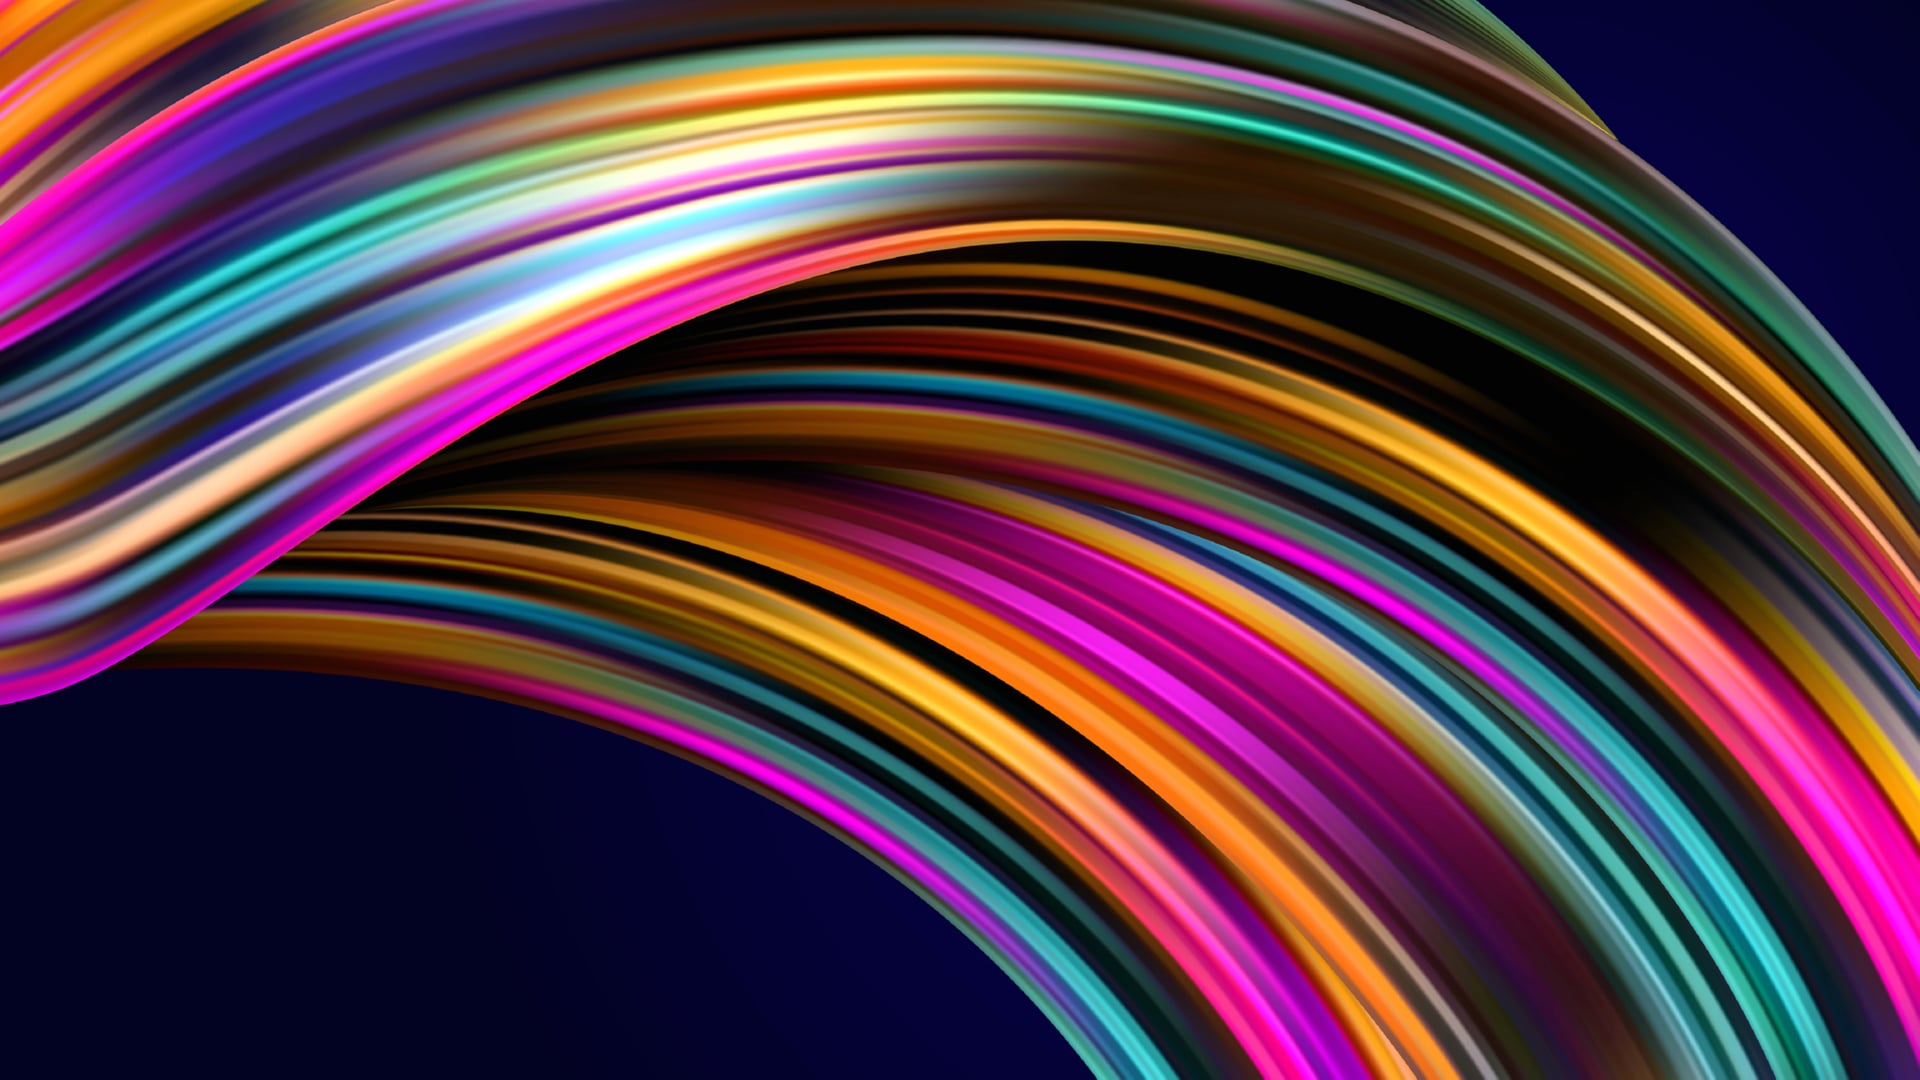 Abstract ASUS ZenBook Pro Duo wallpapers HD quality